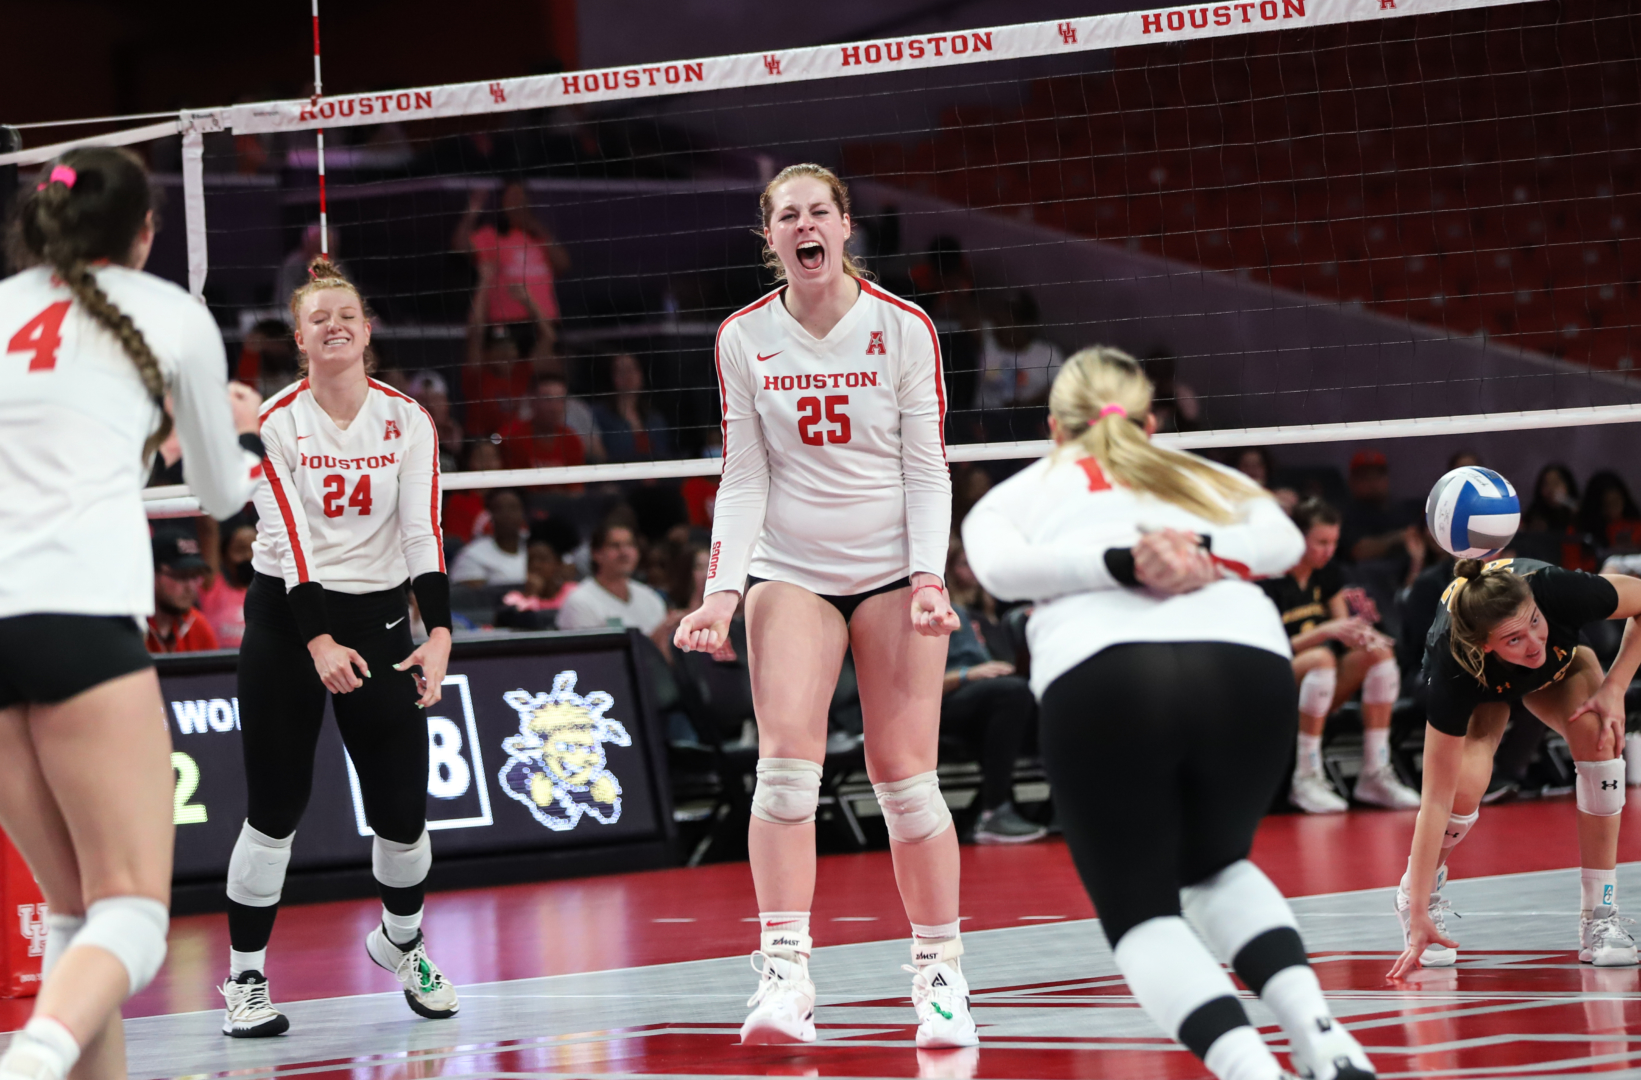 Kellen Morin has rediscovered her passion for volleyball in her first season at UH. | Sean Thomas/The Cougar